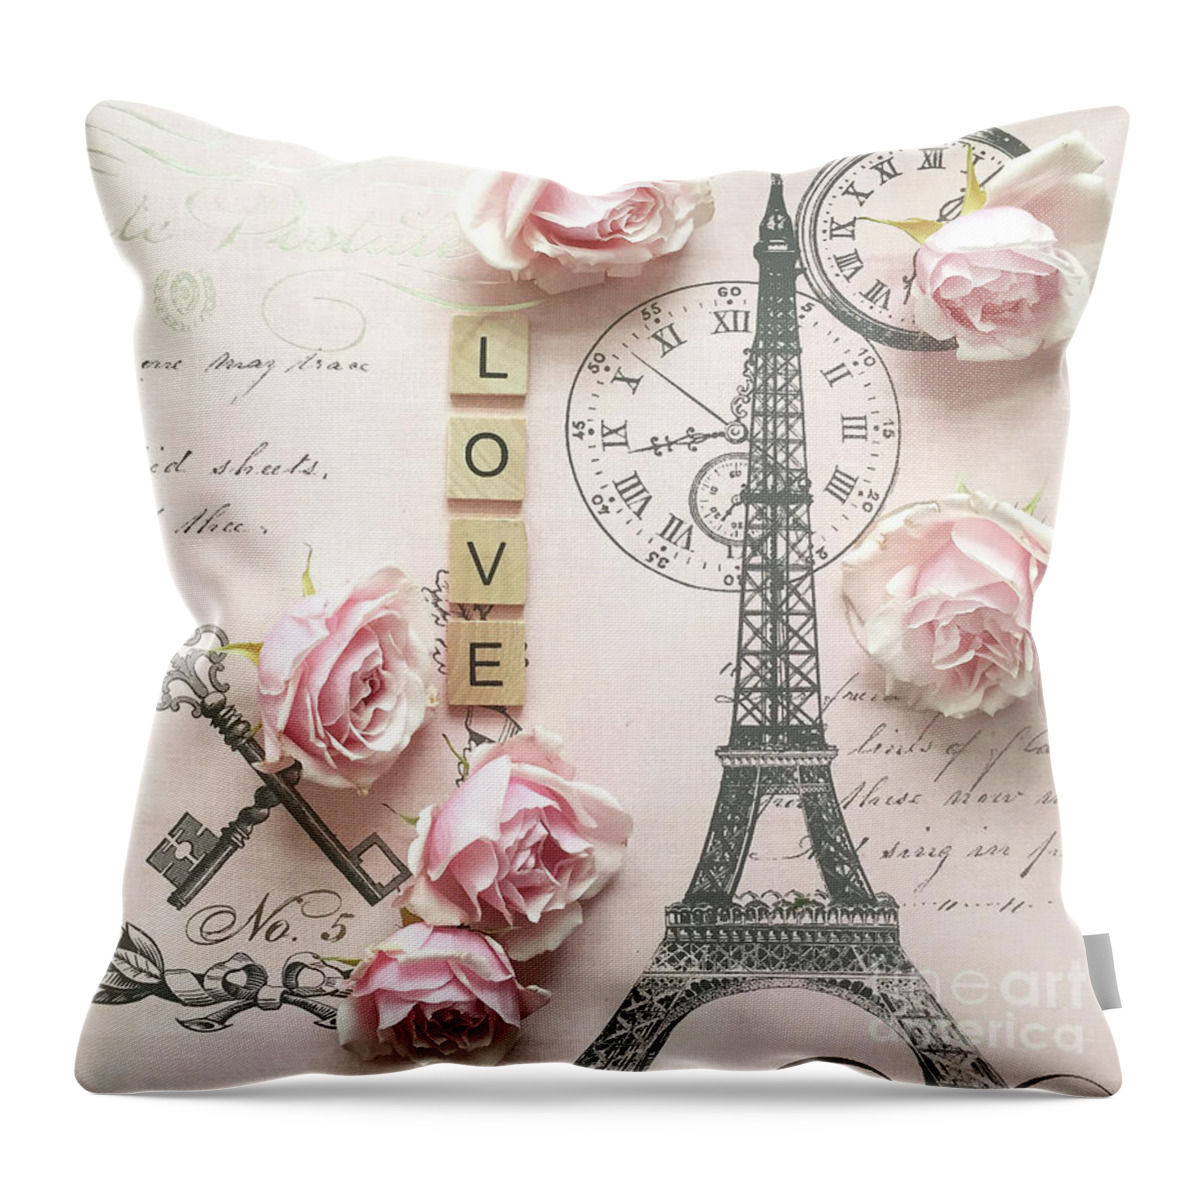 Chateau Chanel French Message Ivory Pillow With Removable Silver FleurdiLis  Pin - Mediterranean - Decorative Pillows - by Evelyn Hope Collection